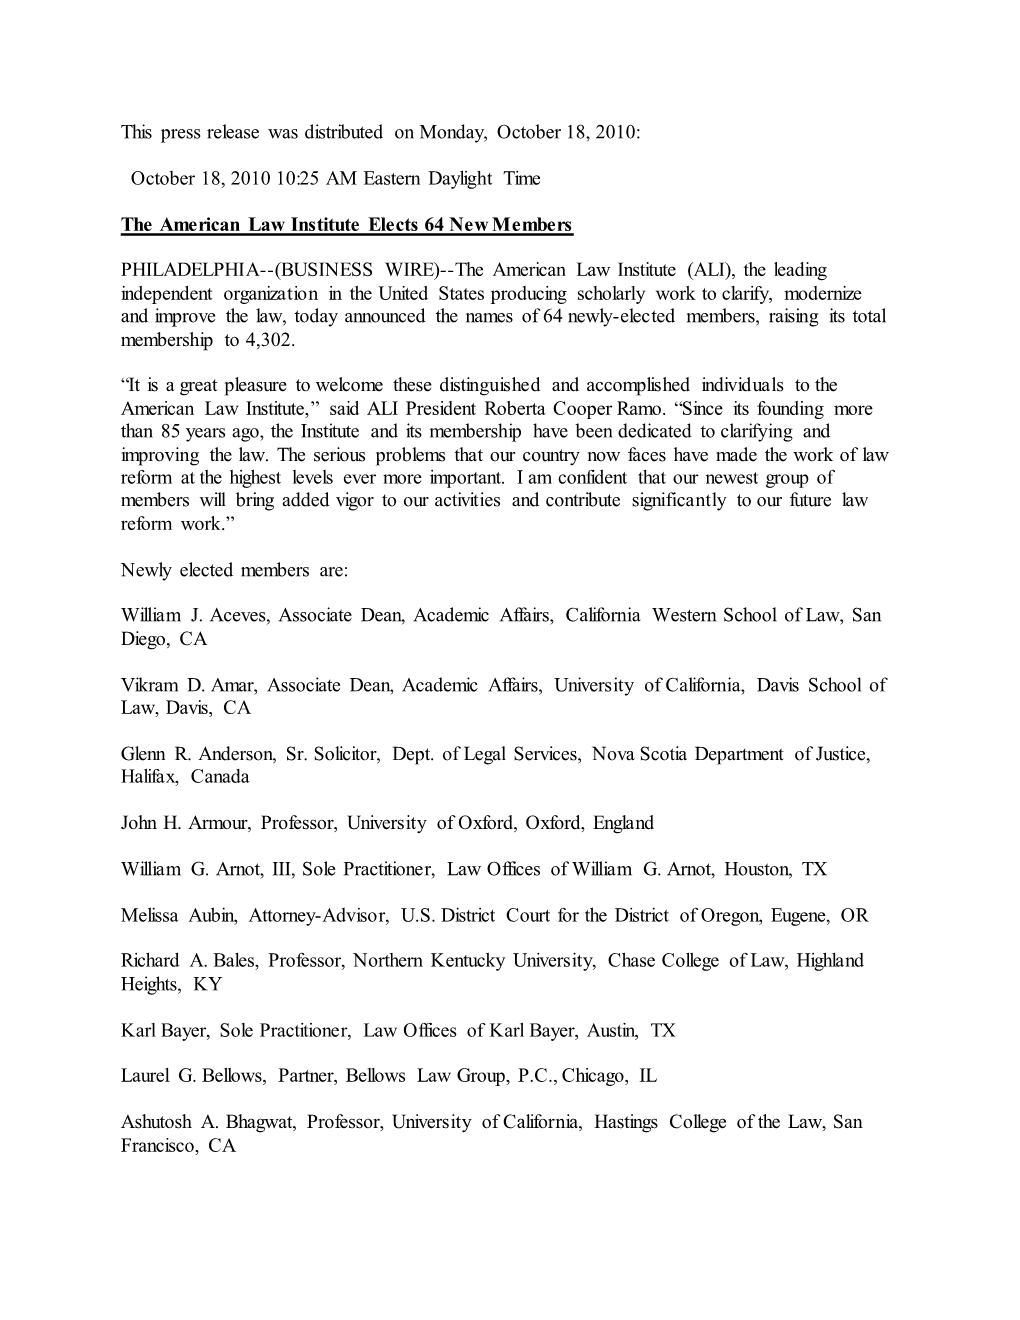 This Press Release Was Distributed on Monday, October 18, 2010